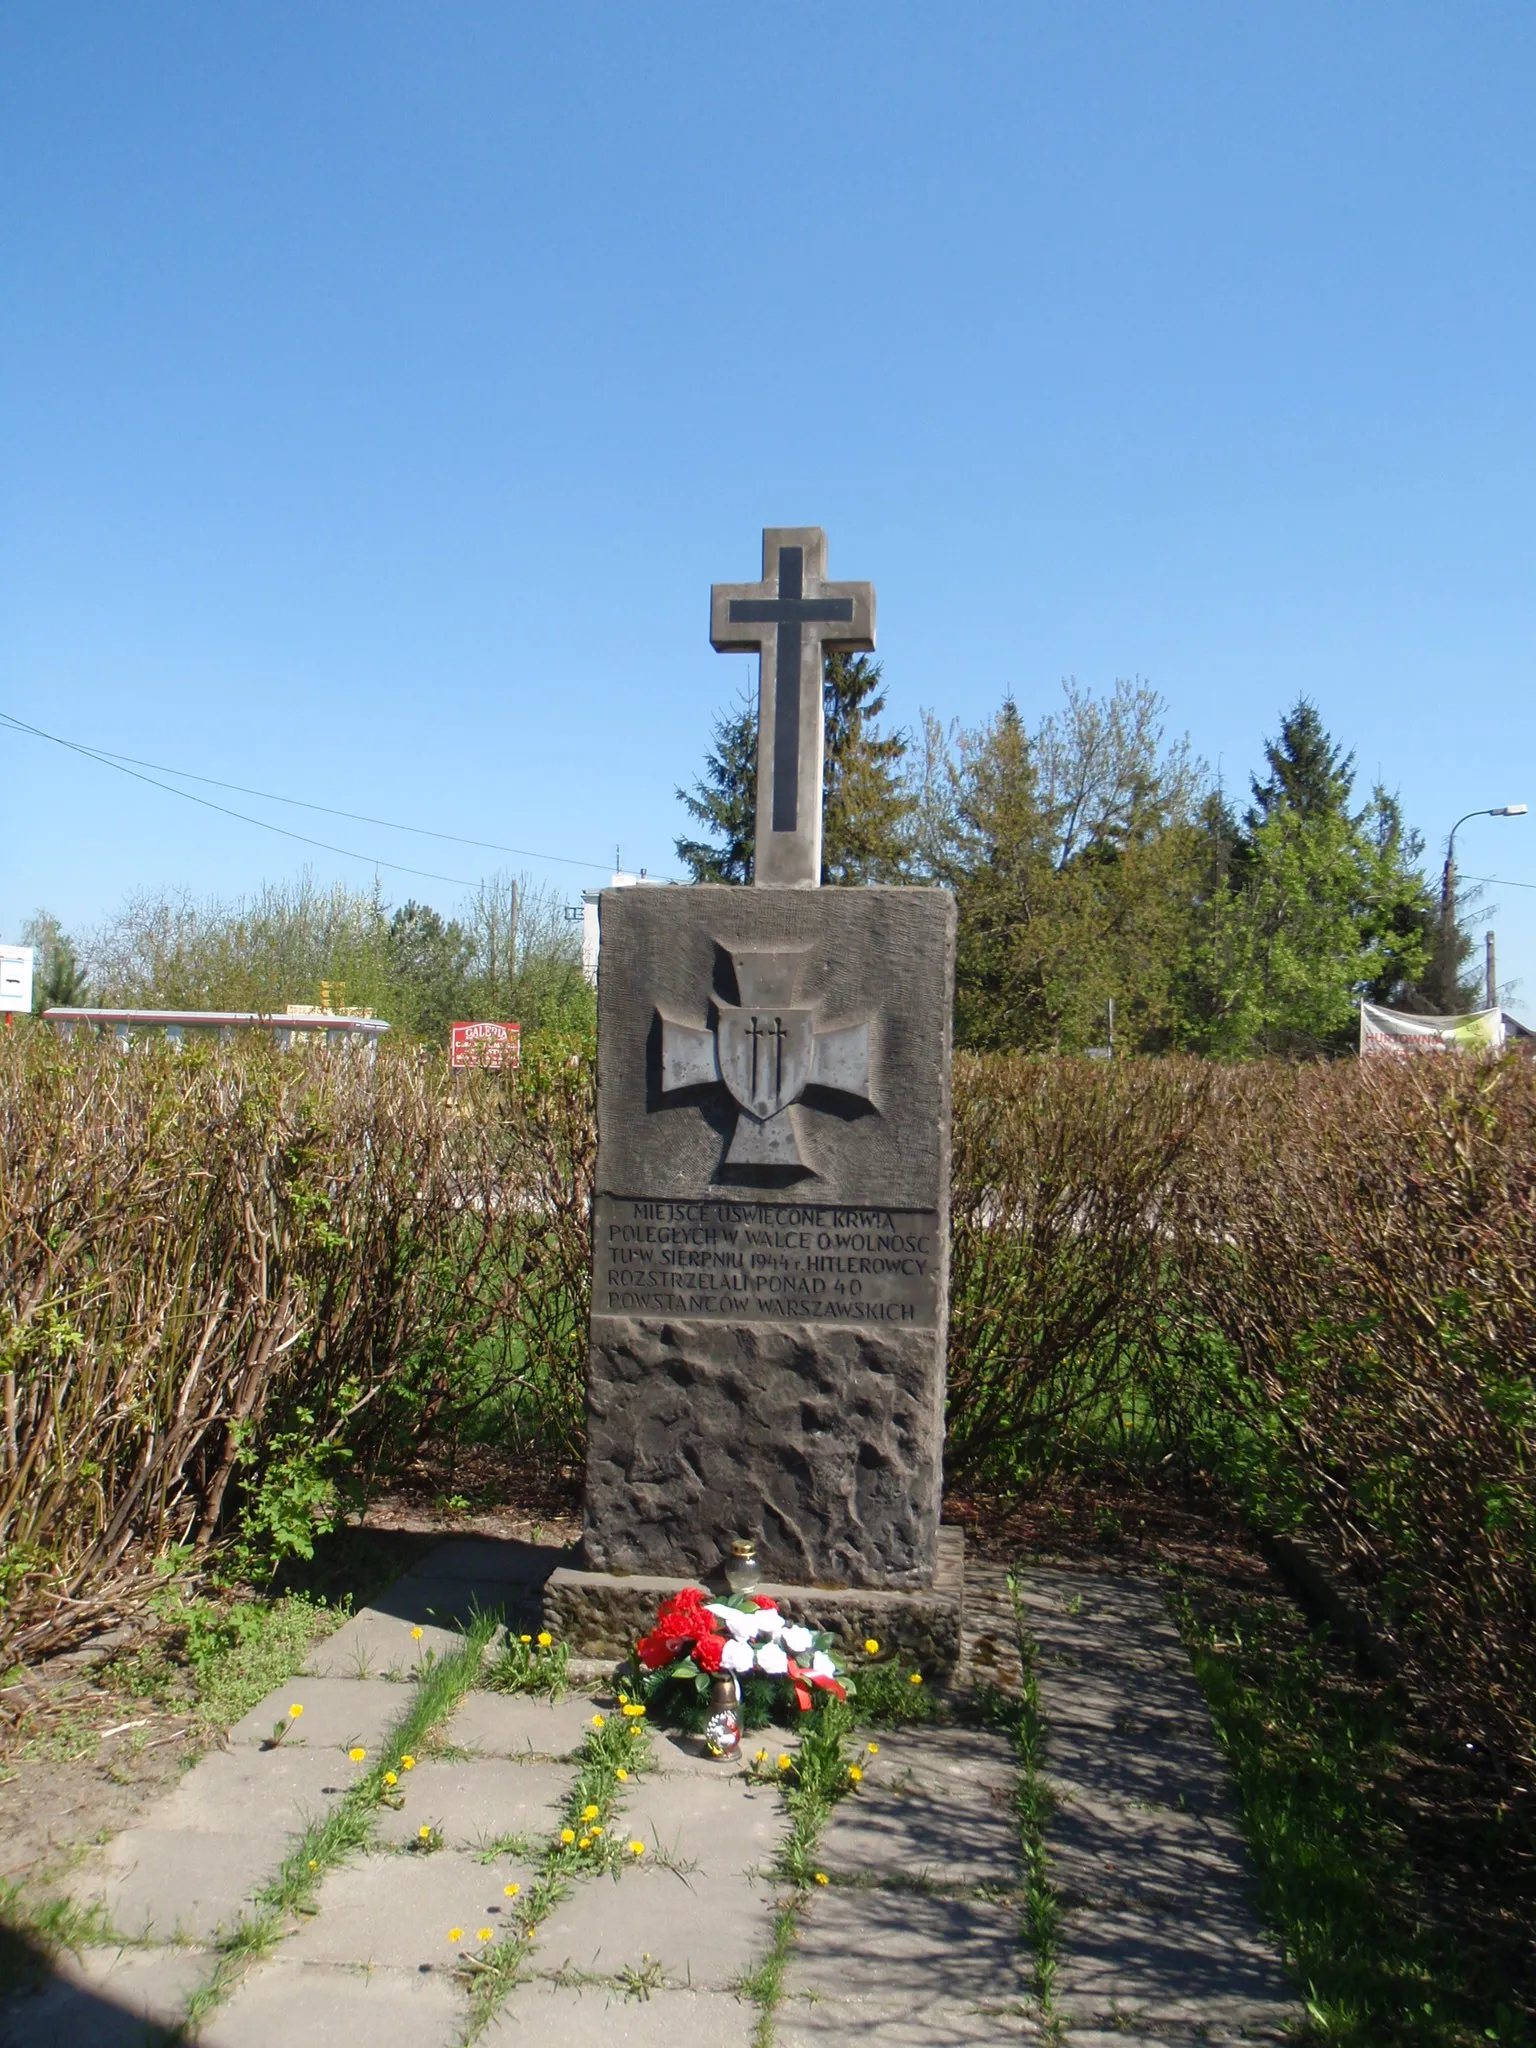 Photo showing: Monument in Piaseczno commemorating more than 40 Polish soldiers of Warsaw Uprising killed by Germans